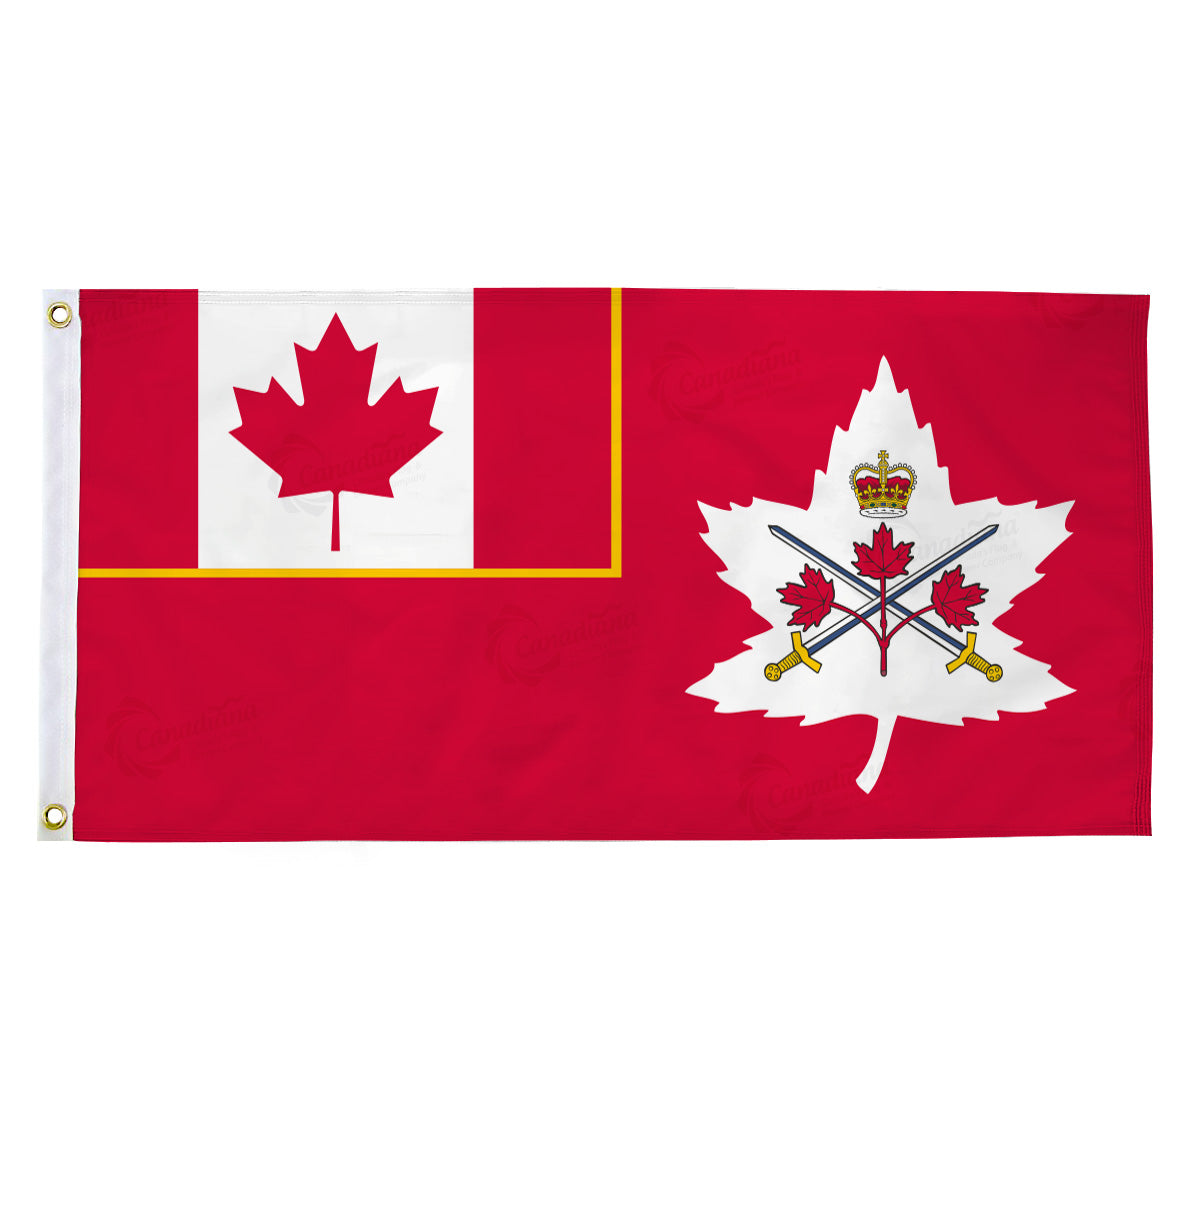 FLAG-CANADA 72 X 36 NYLITE OUTDOOR ROPE AND TOGGLE